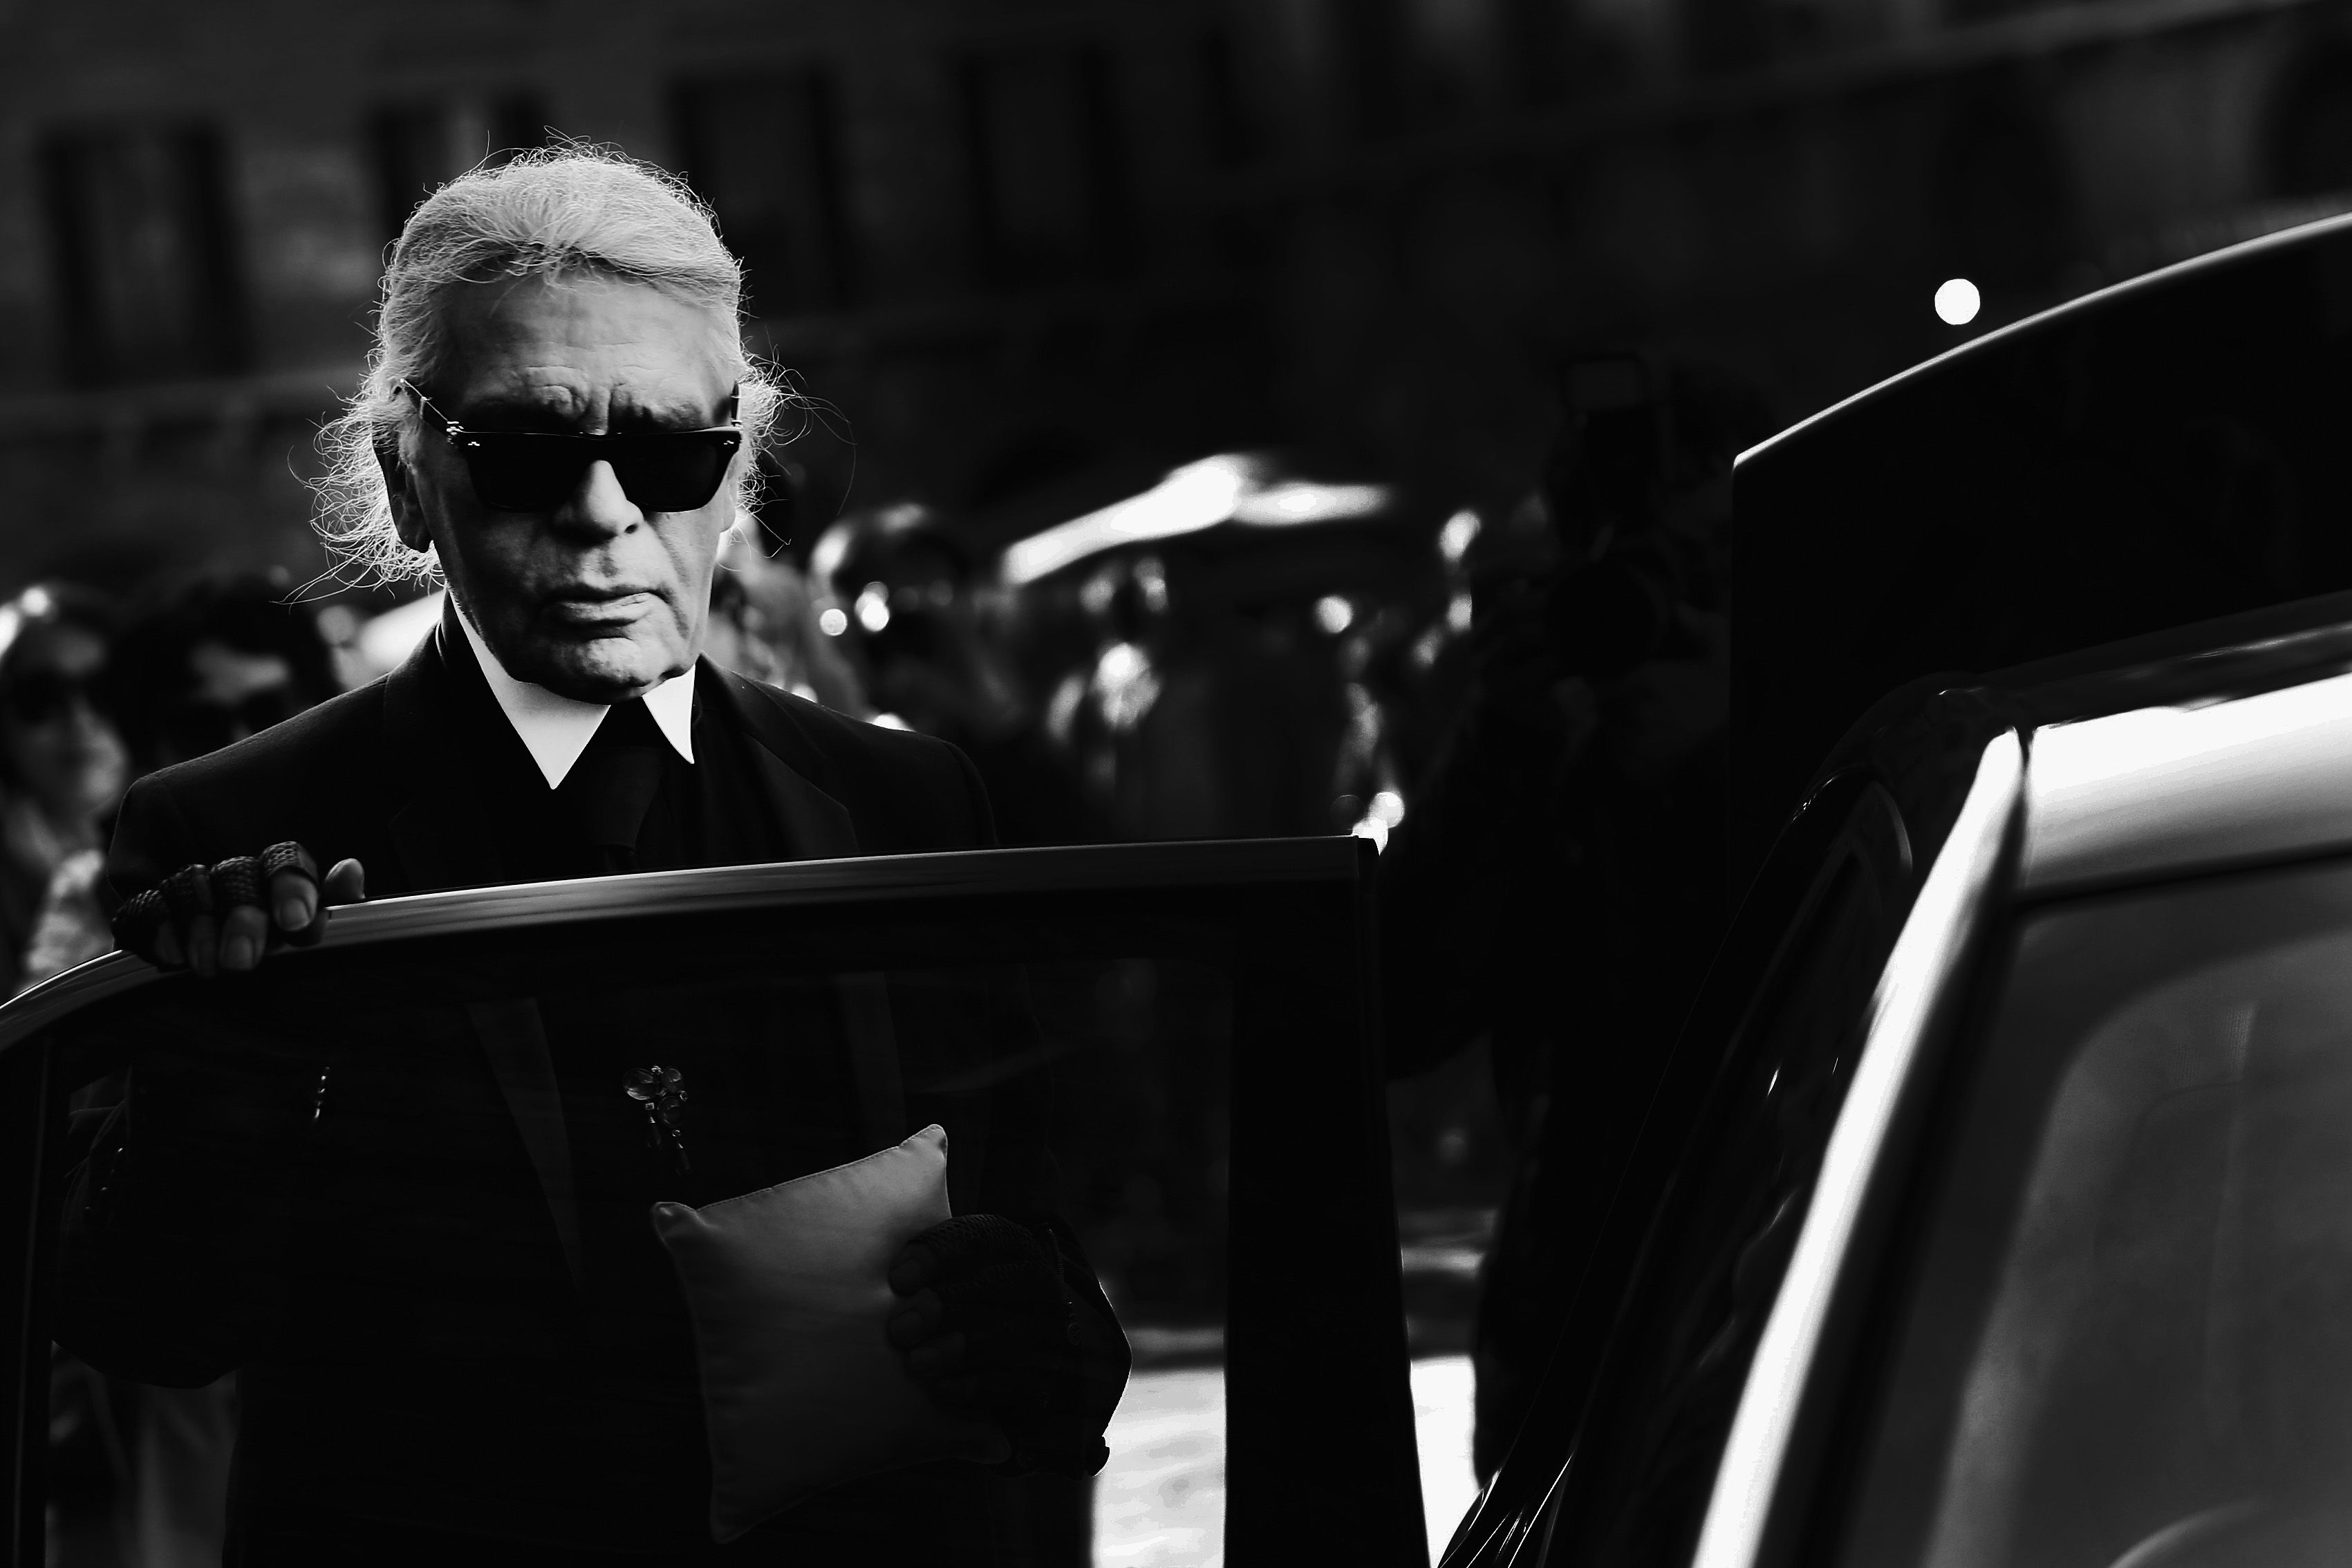 Remembering Karl Lagerfeld Photos - Karl Lagerfeld`s Iconic Life in Photos